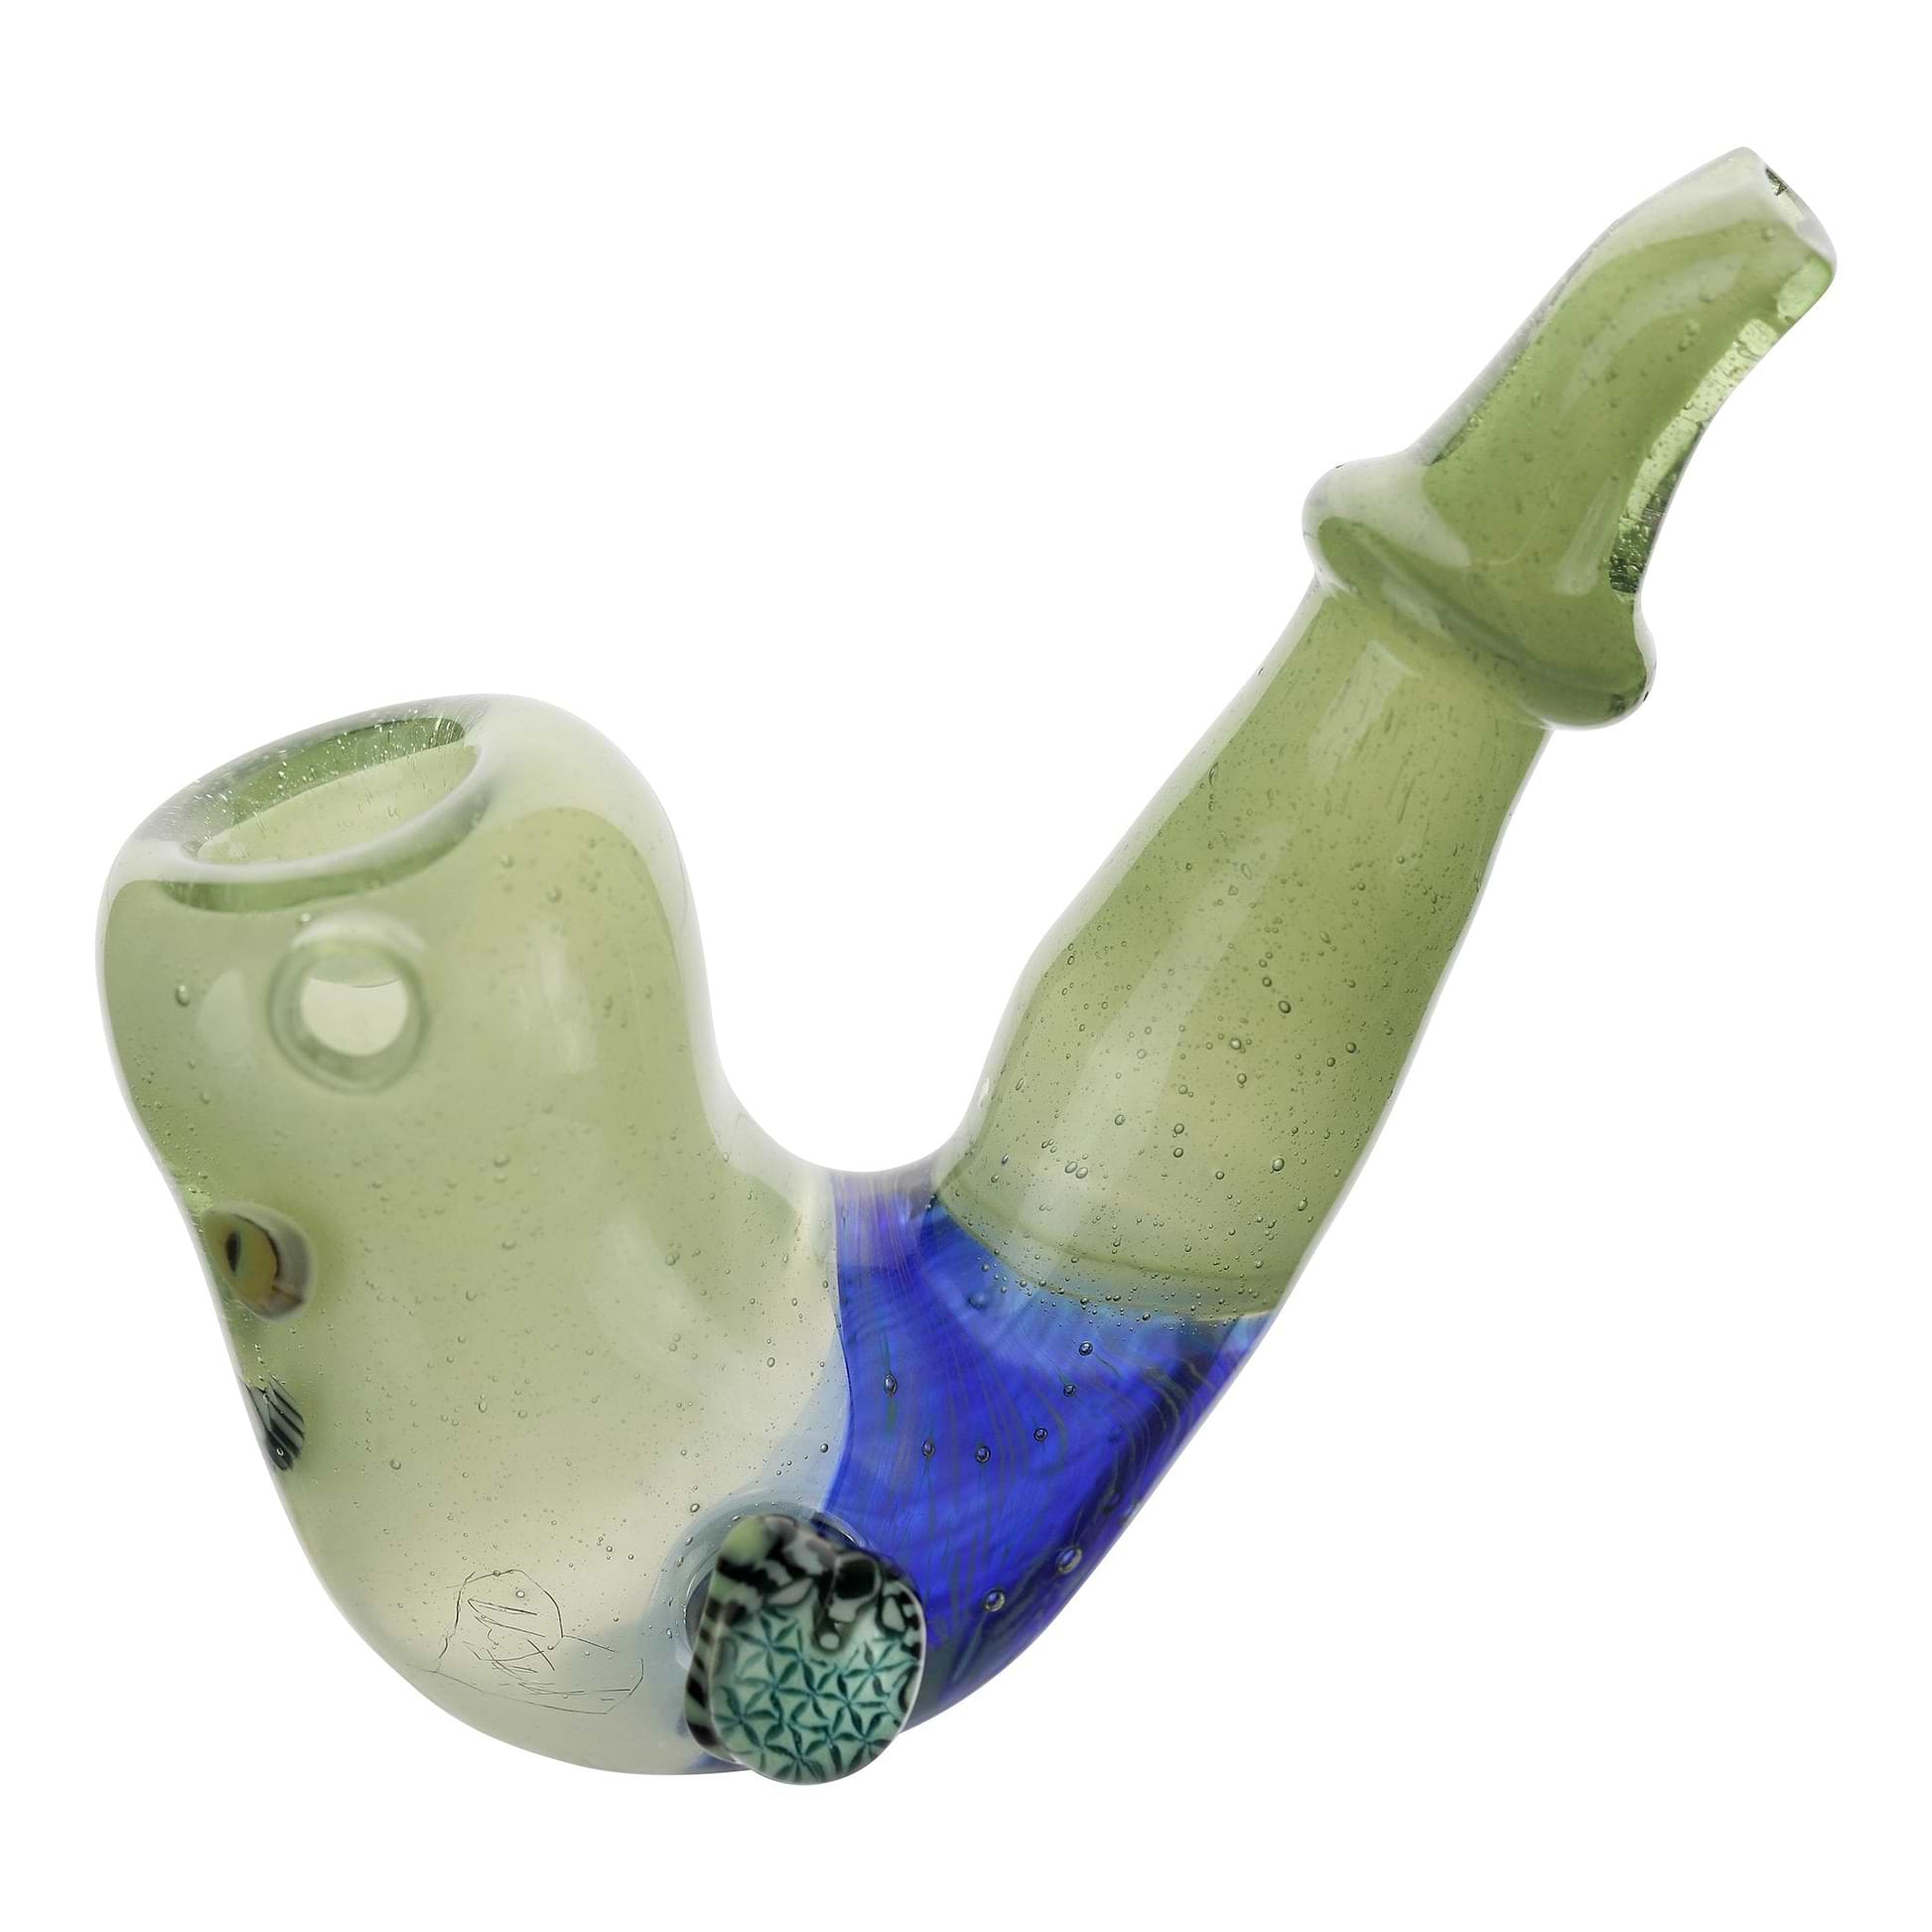 The Olive Trees Oboe Pipe by Matt Vision